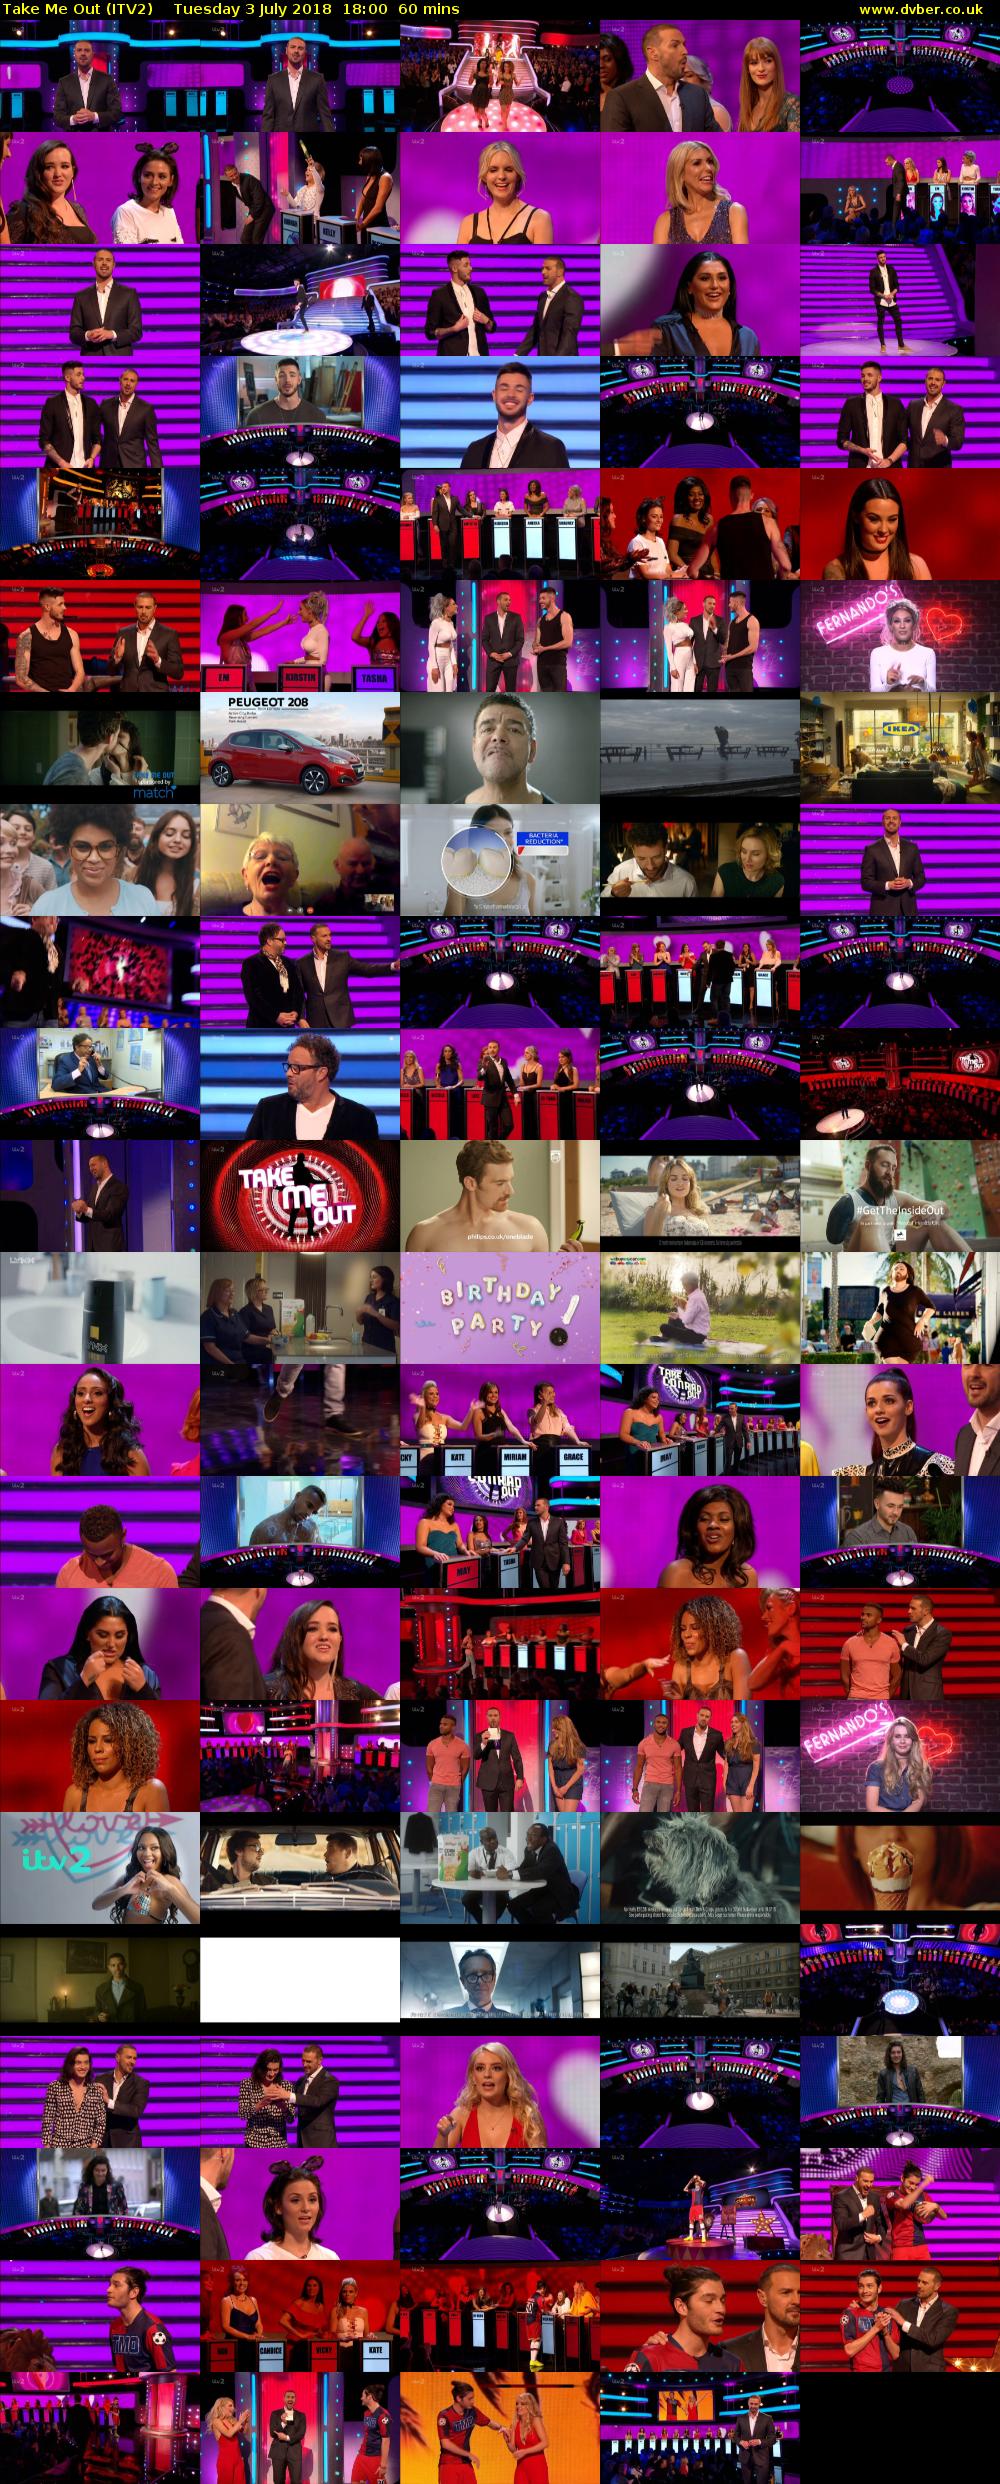 Take Me Out (ITV2) Tuesday 3 July 2018 18:00 - 19:00